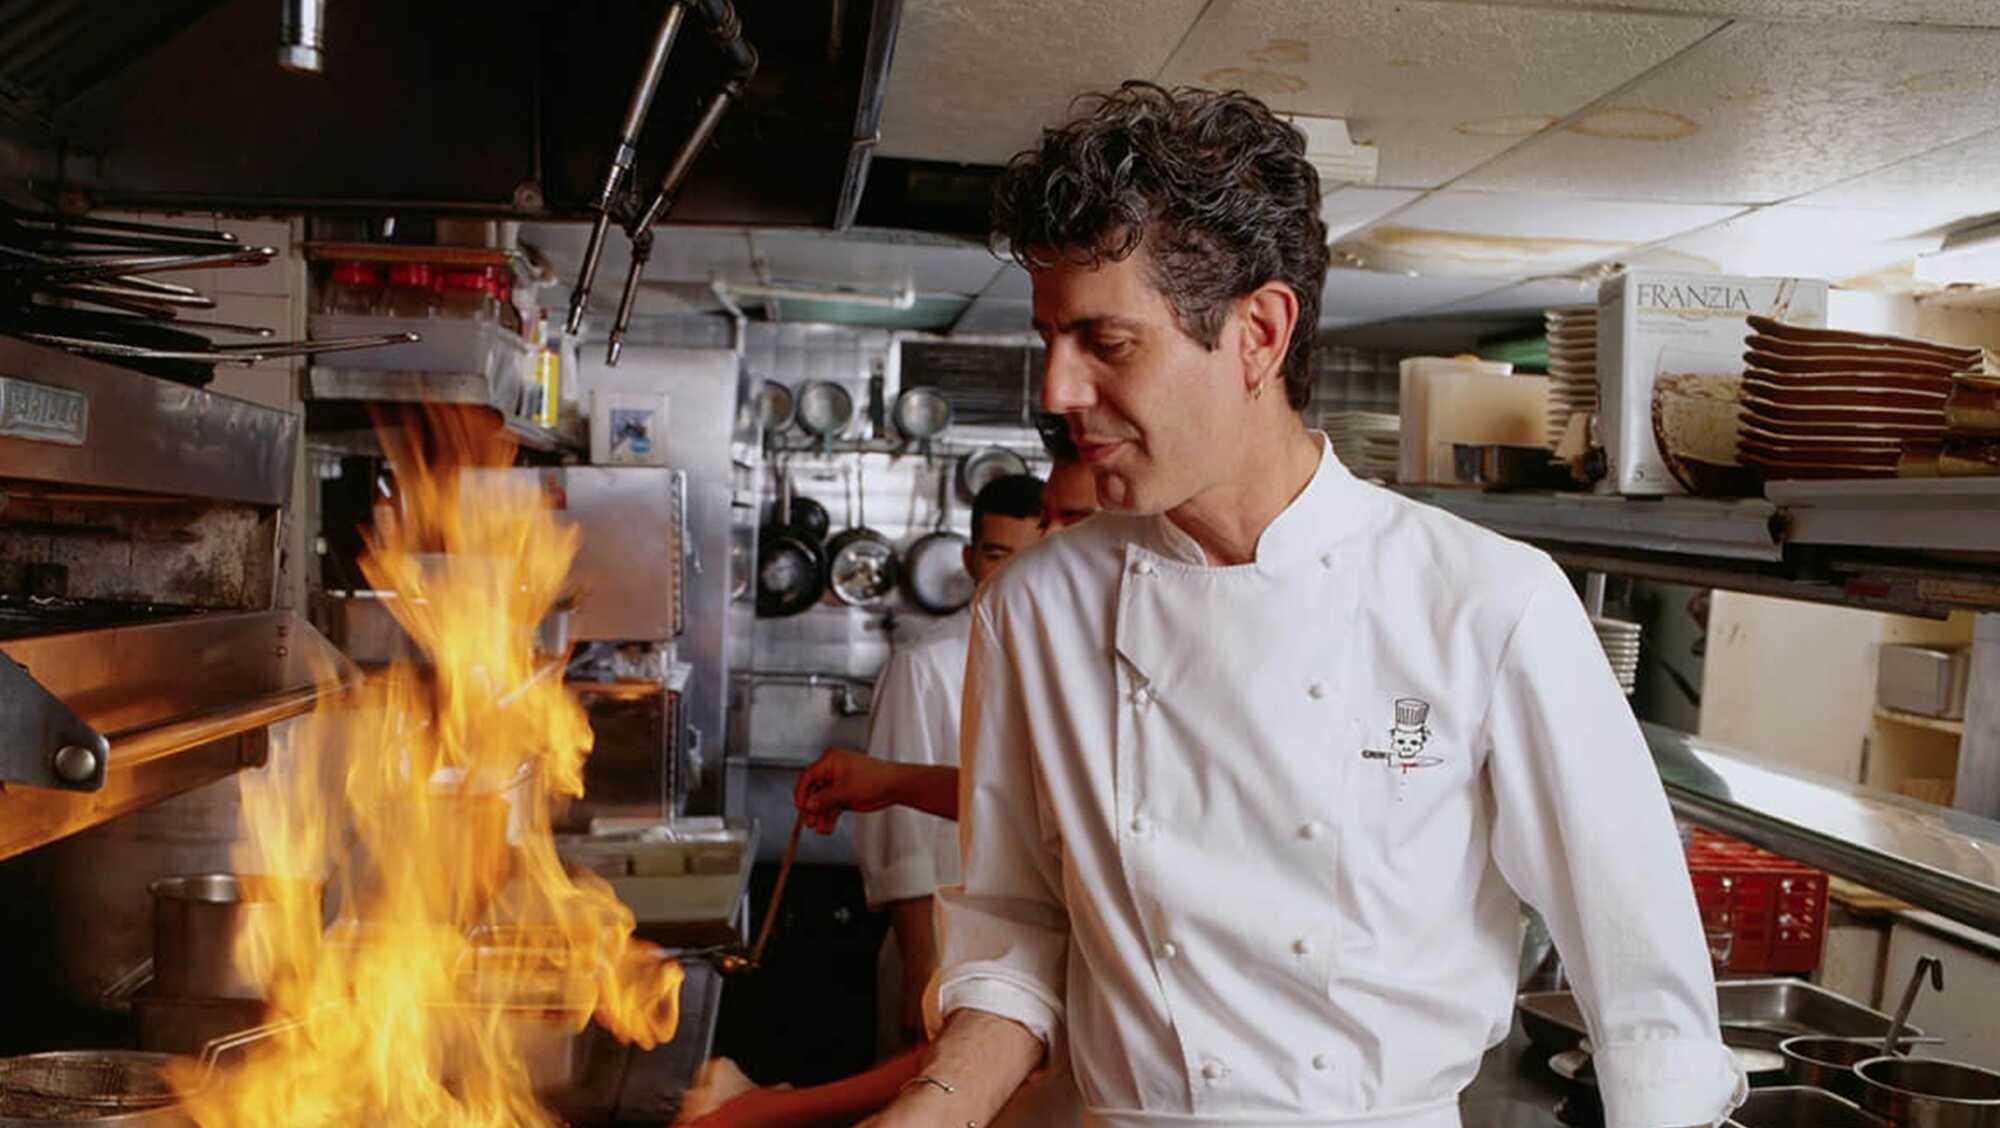 Anthony Bourdain in Les Halles